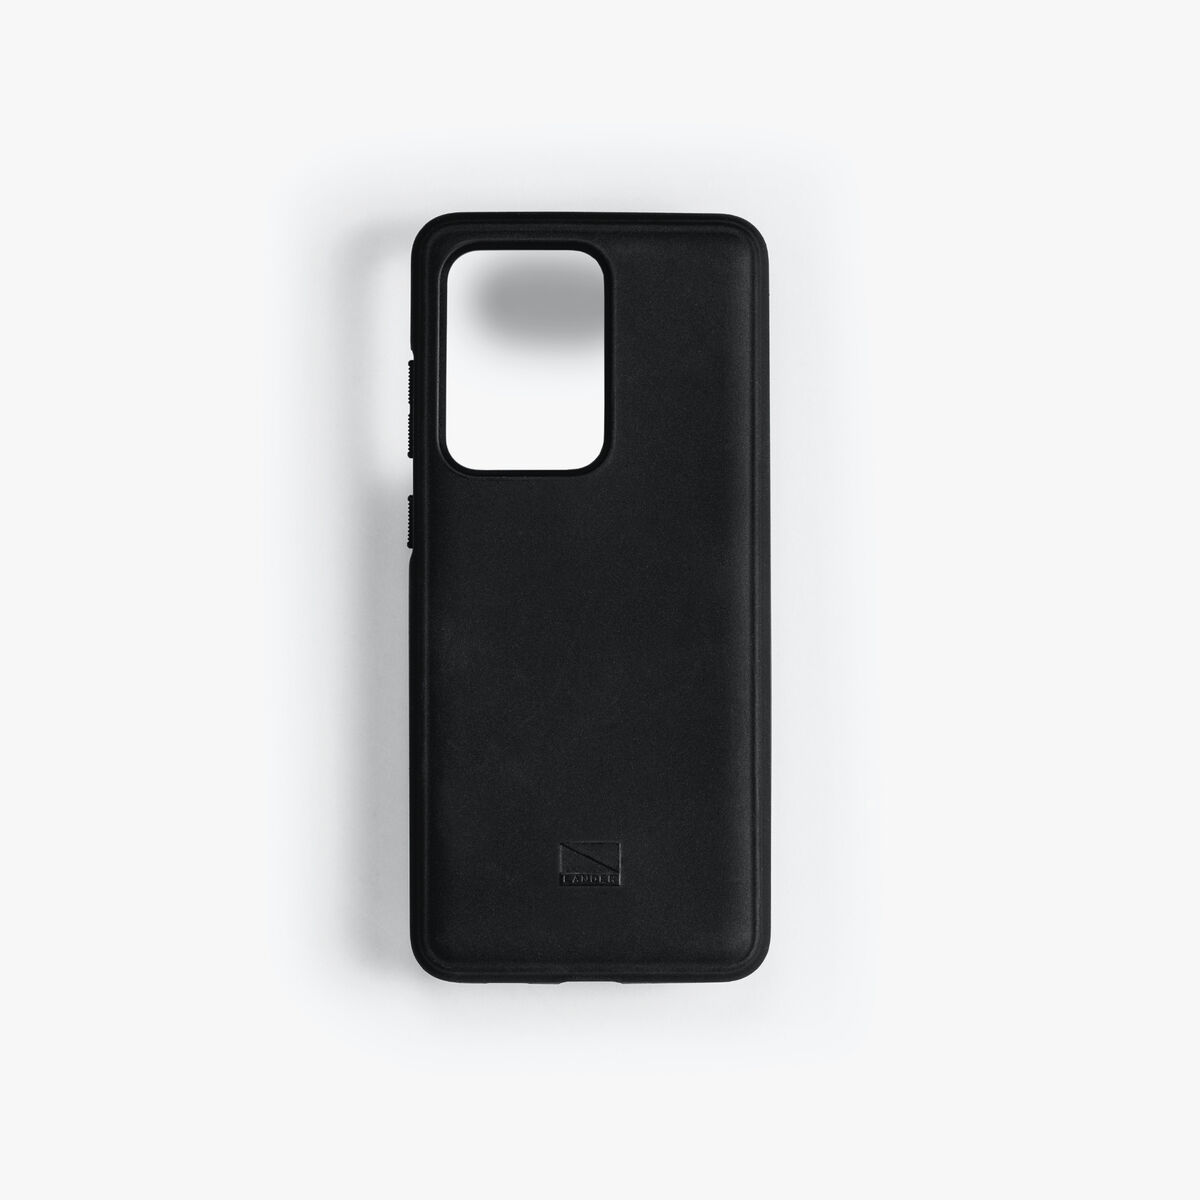 Sego Case (Black) for Samsung Galaxy S20 Ultra,, large